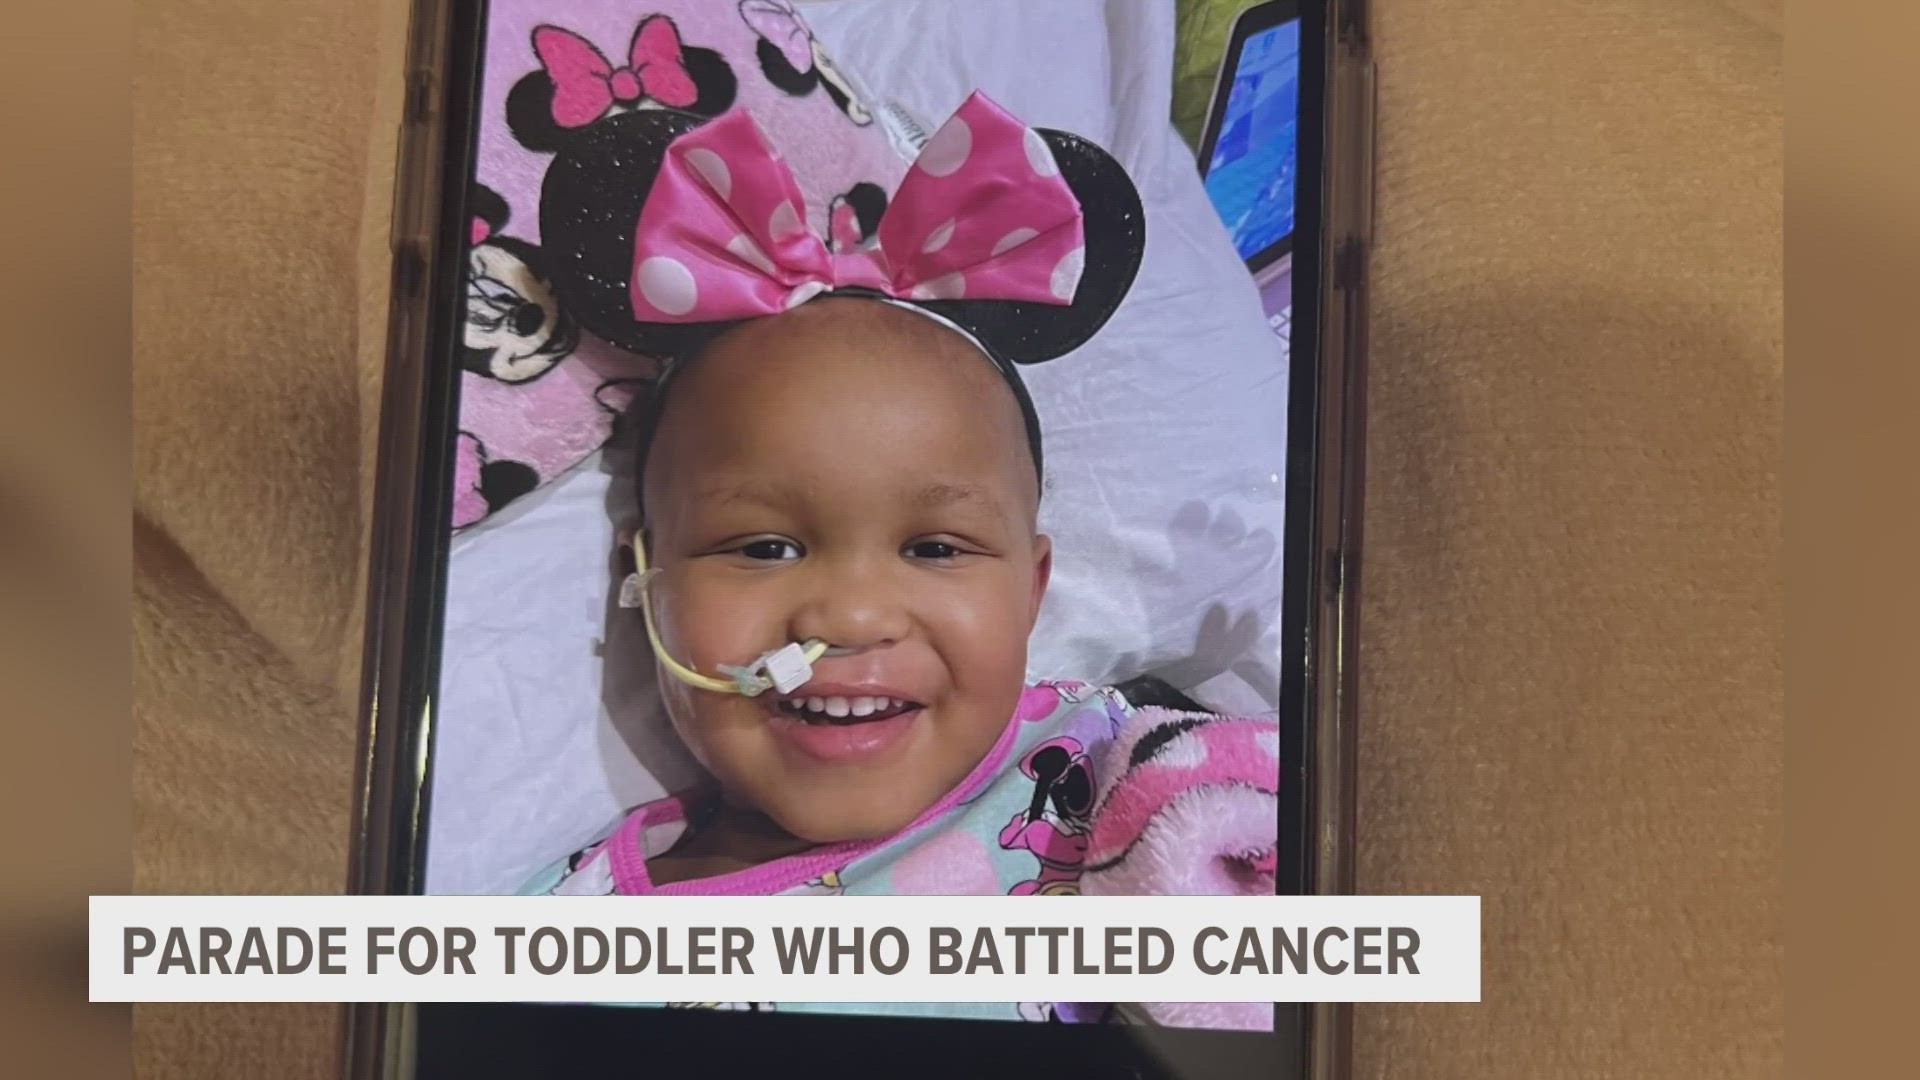 She is only two years old and is just home from the hospital after finishing her cancer treatment.